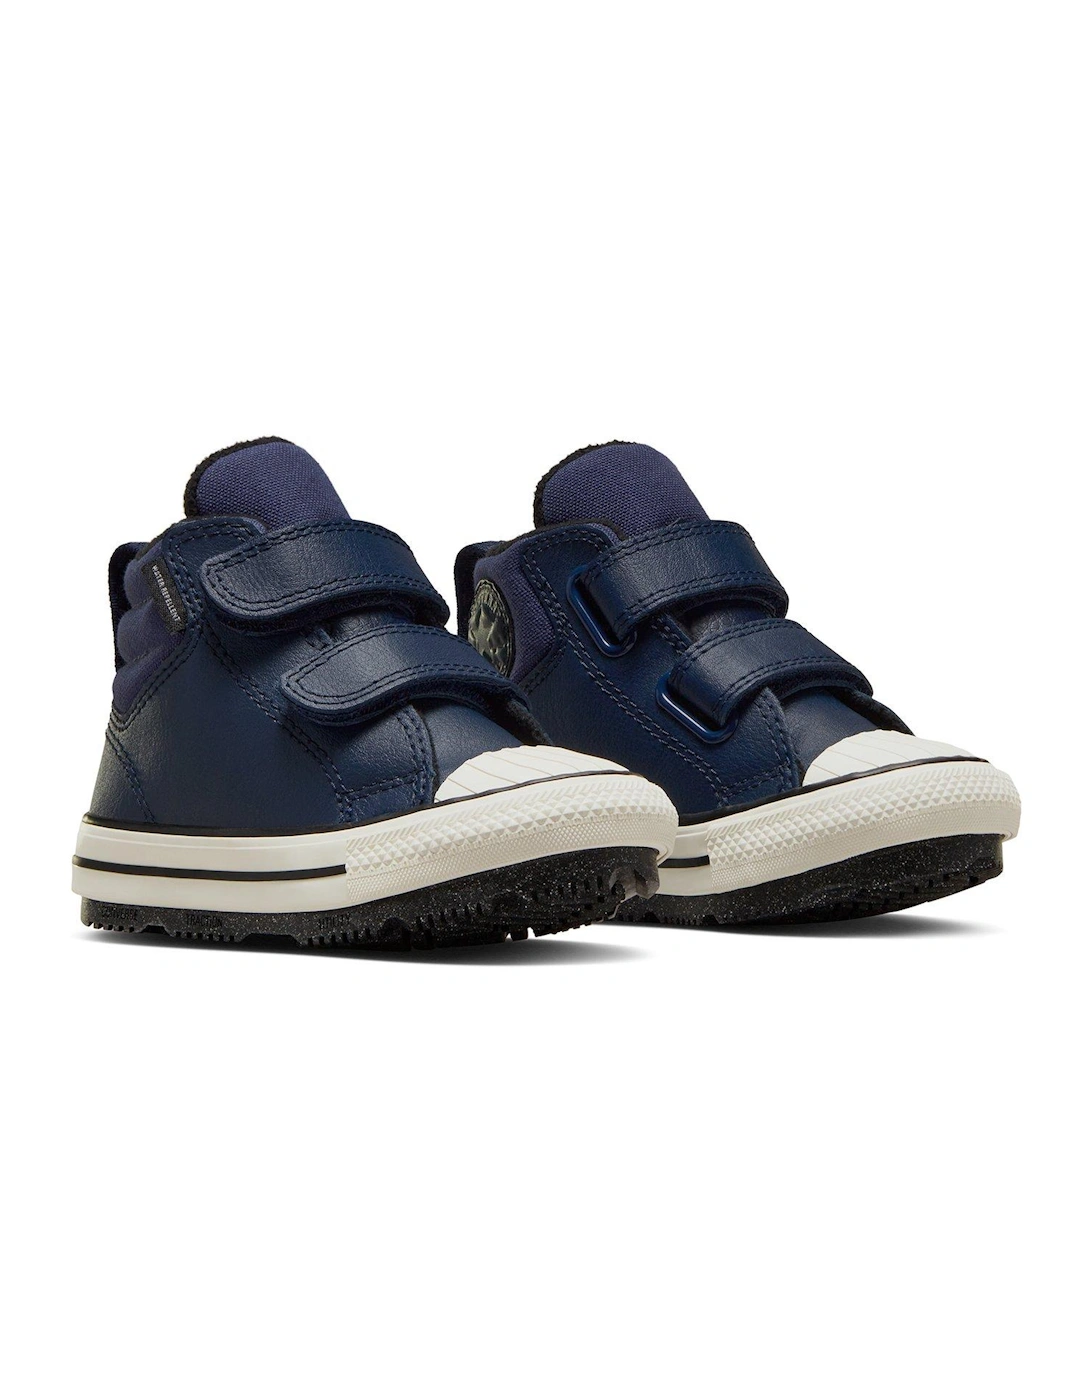 Toddler Berkshire Boot Counter Climate Trainers - Navy